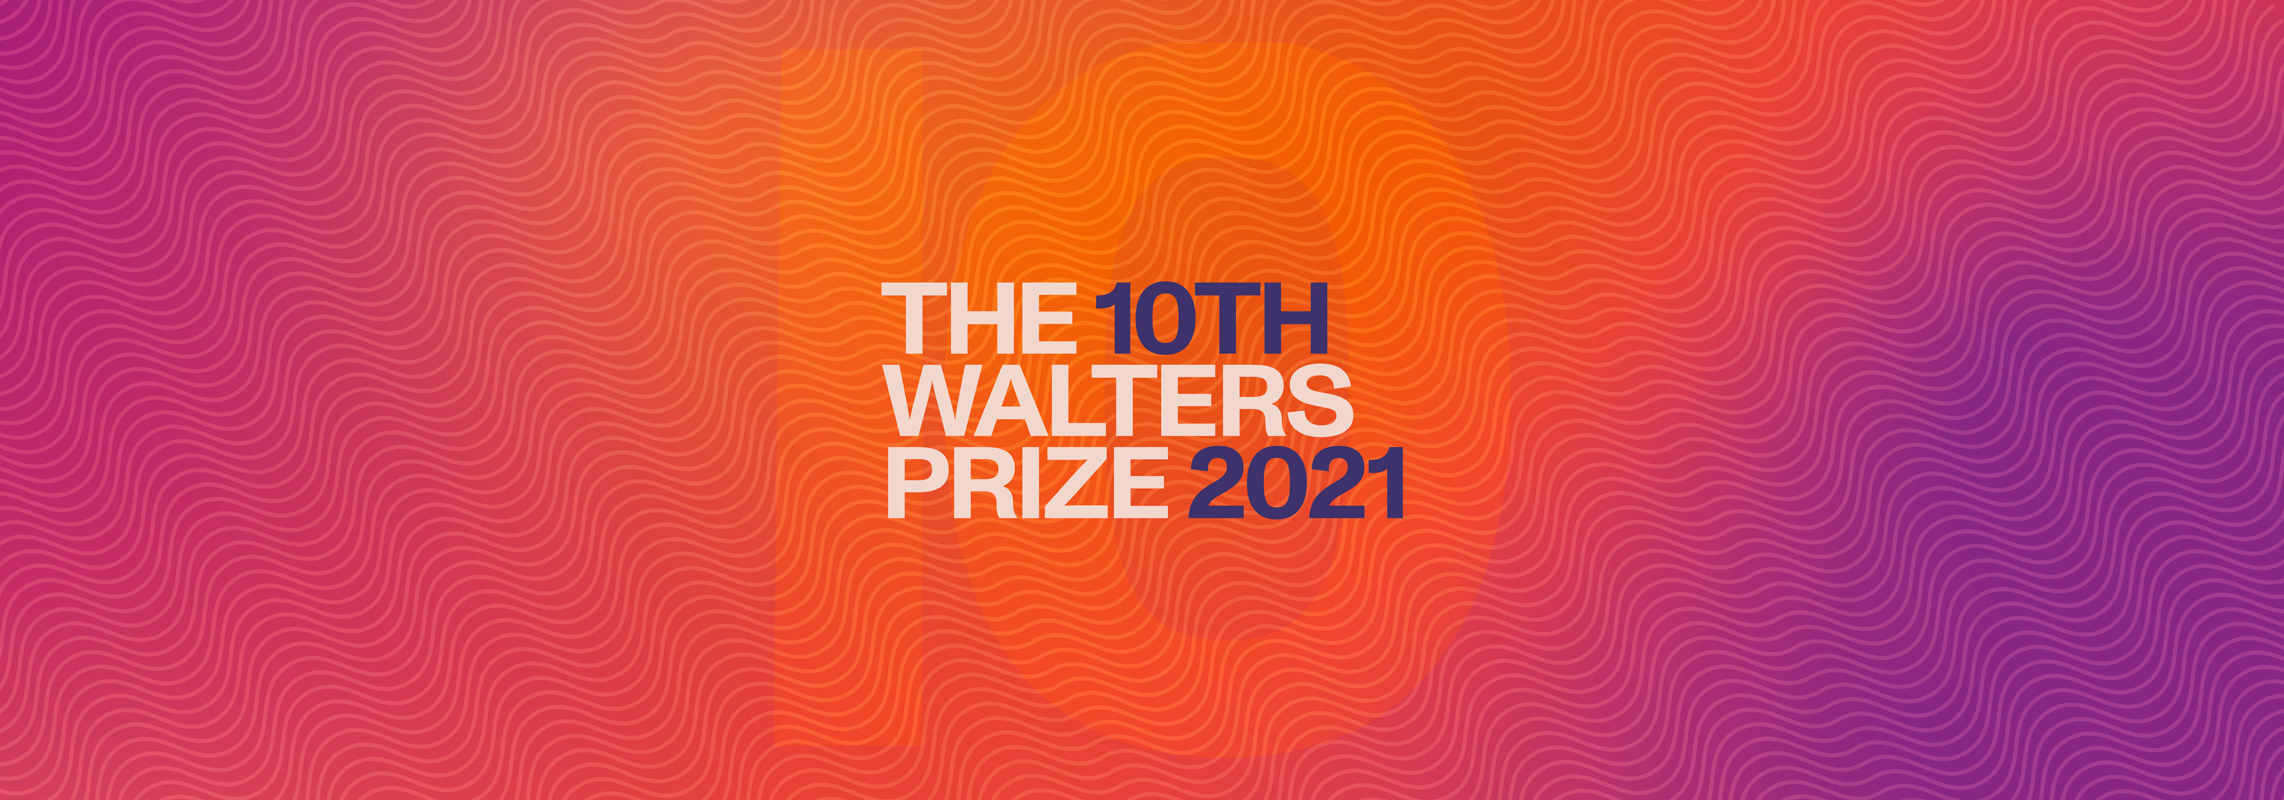 The Walters Prize 2021 Auckland Art Gallery